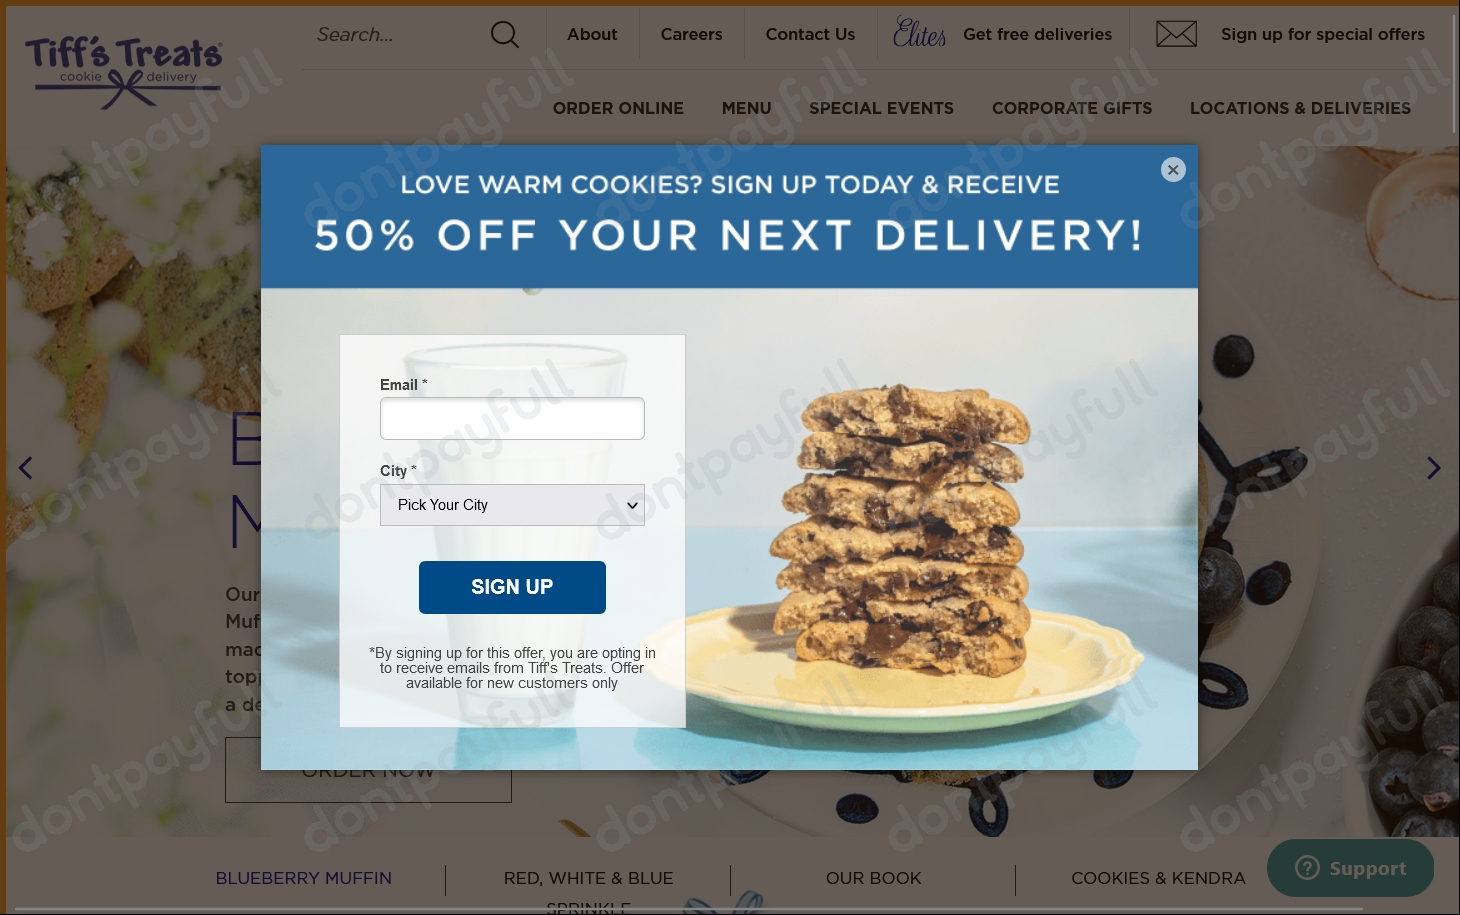 Tiff's Treats Cookie Delivery Coupons (50 Discount)